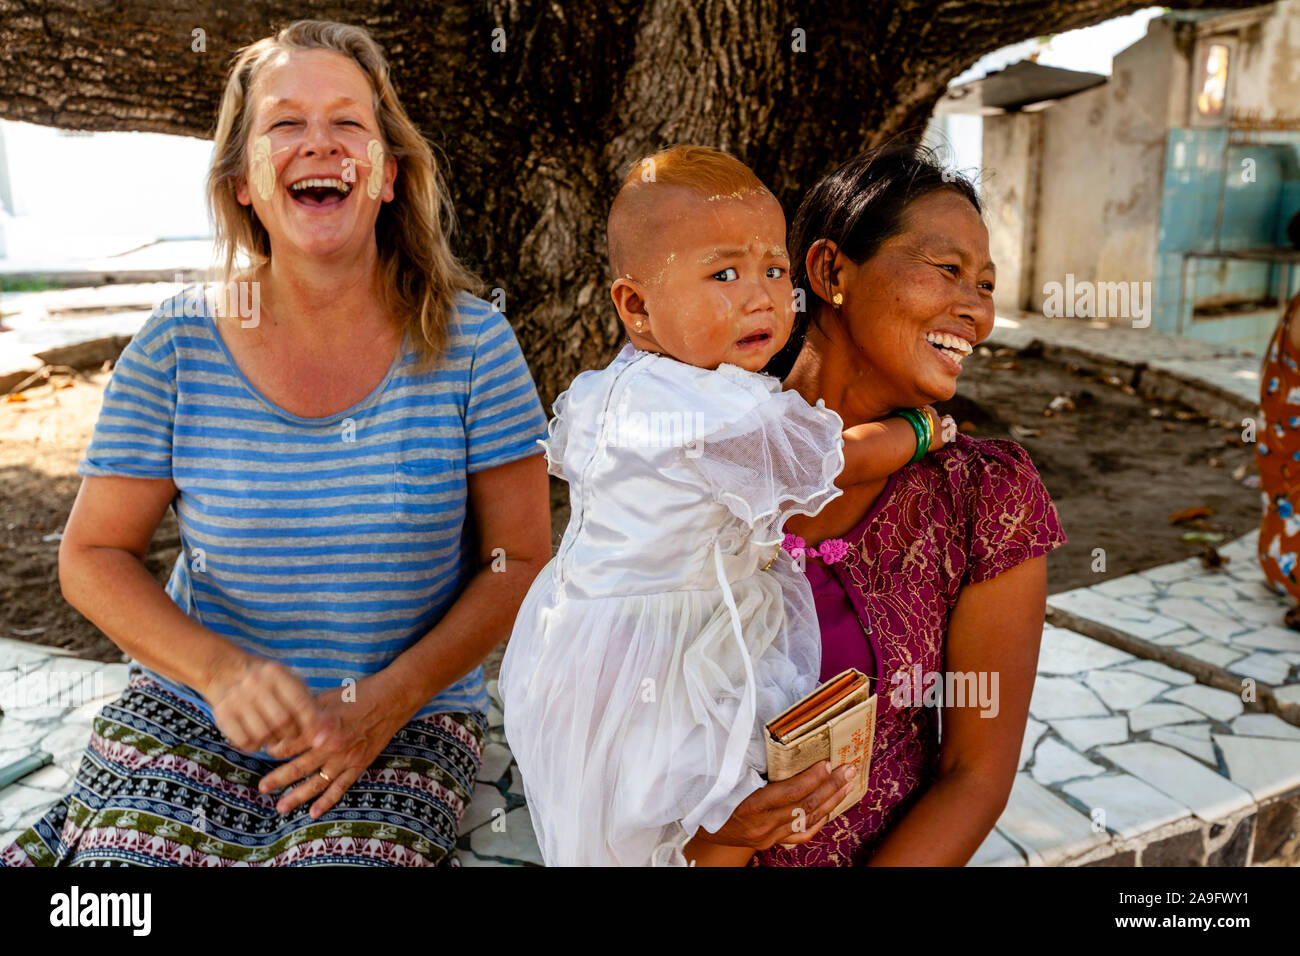 A Burmese Child Is Frightened At The Sight Of A Caucasian Female Tourist The Kuthodaw Pagoda, Mandalay, Myanmar. Stock Photo